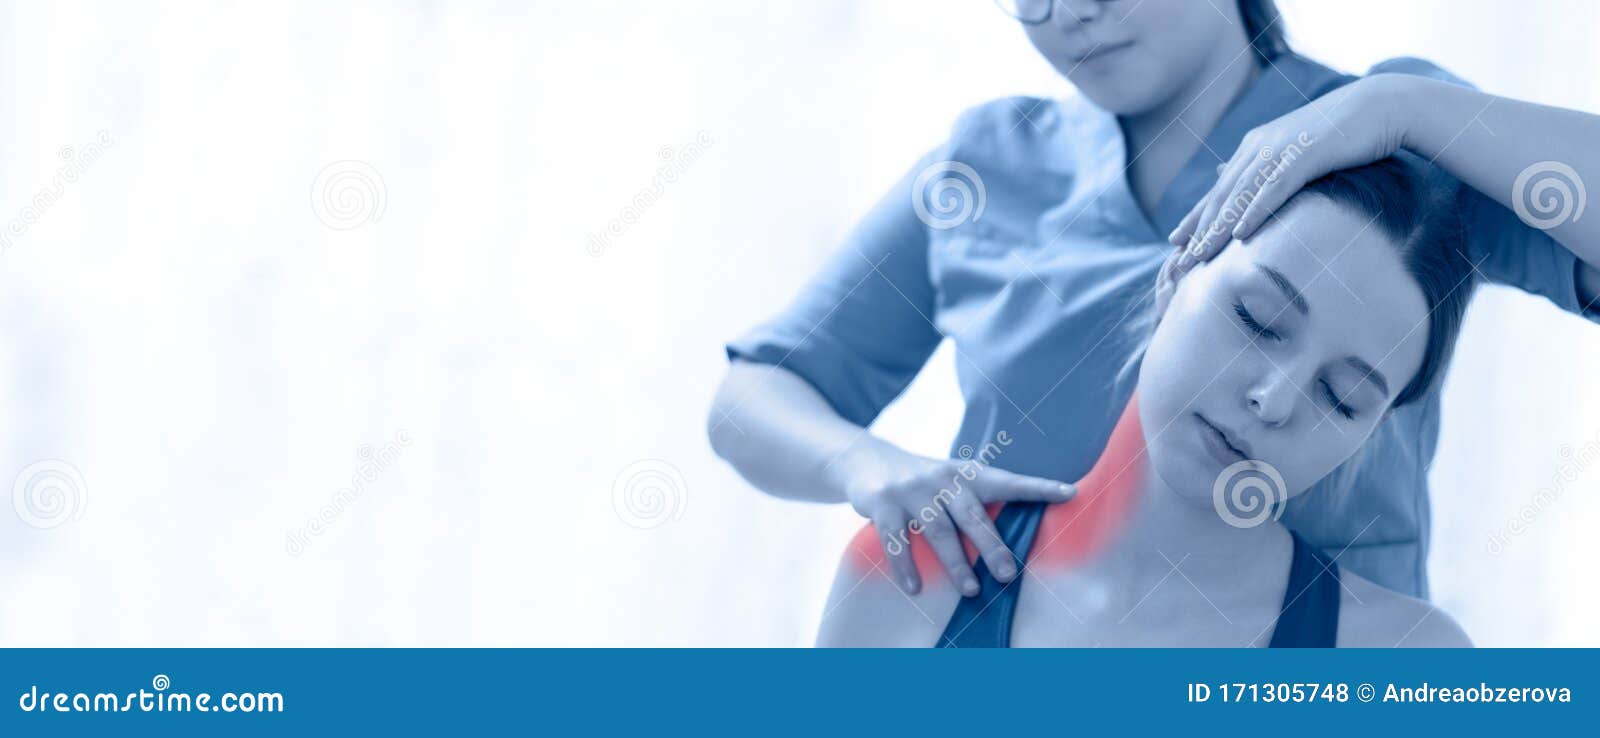 female physiotherapist or a chiropractor adjusting patients neck. physiotherapy, rehabilitation banner.